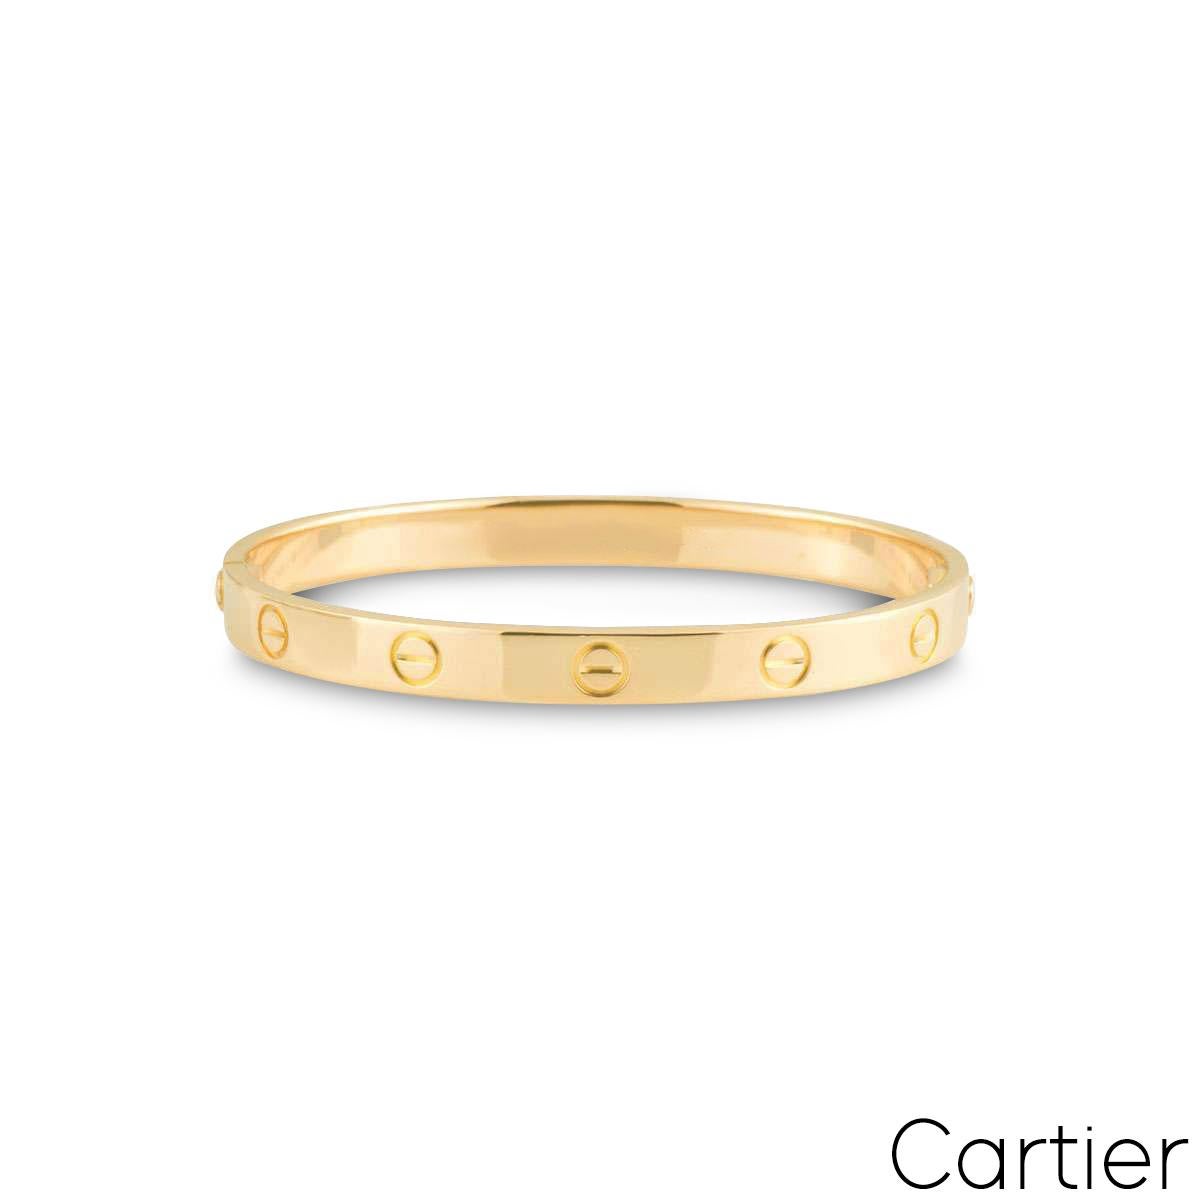 An 18k yellow gold Cartier bracelet from the Love collection. The bracelet has the screw motif displayed around the outer edge and features the new style screw fitting. This bracelet is a size 19 and has a gross weight 36.6 grams. 

Comes complete